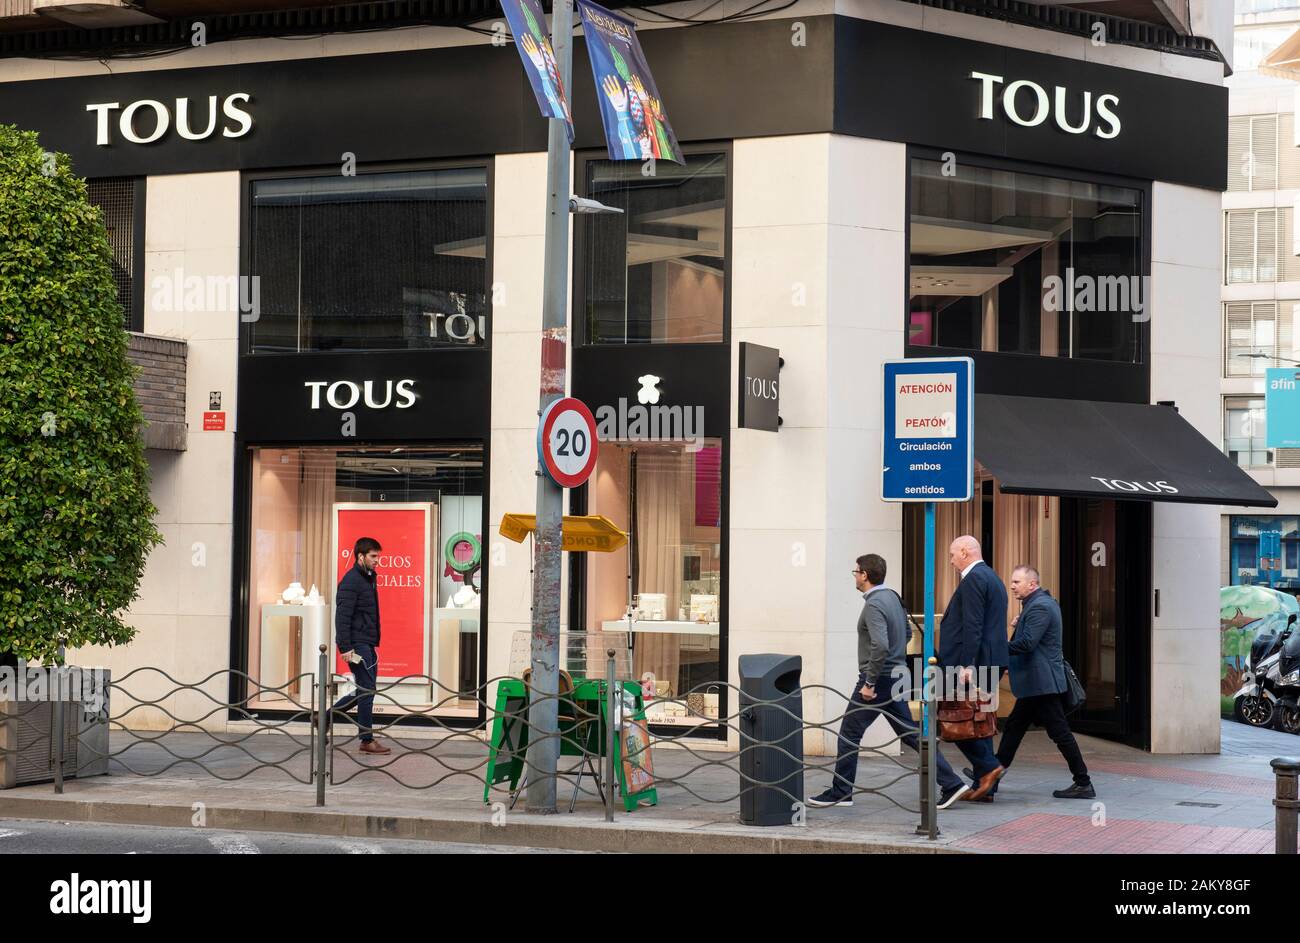 Spanish jewelry, accessories and fashion retailer Tous store seen in Spain  Stock Photo - Alamy